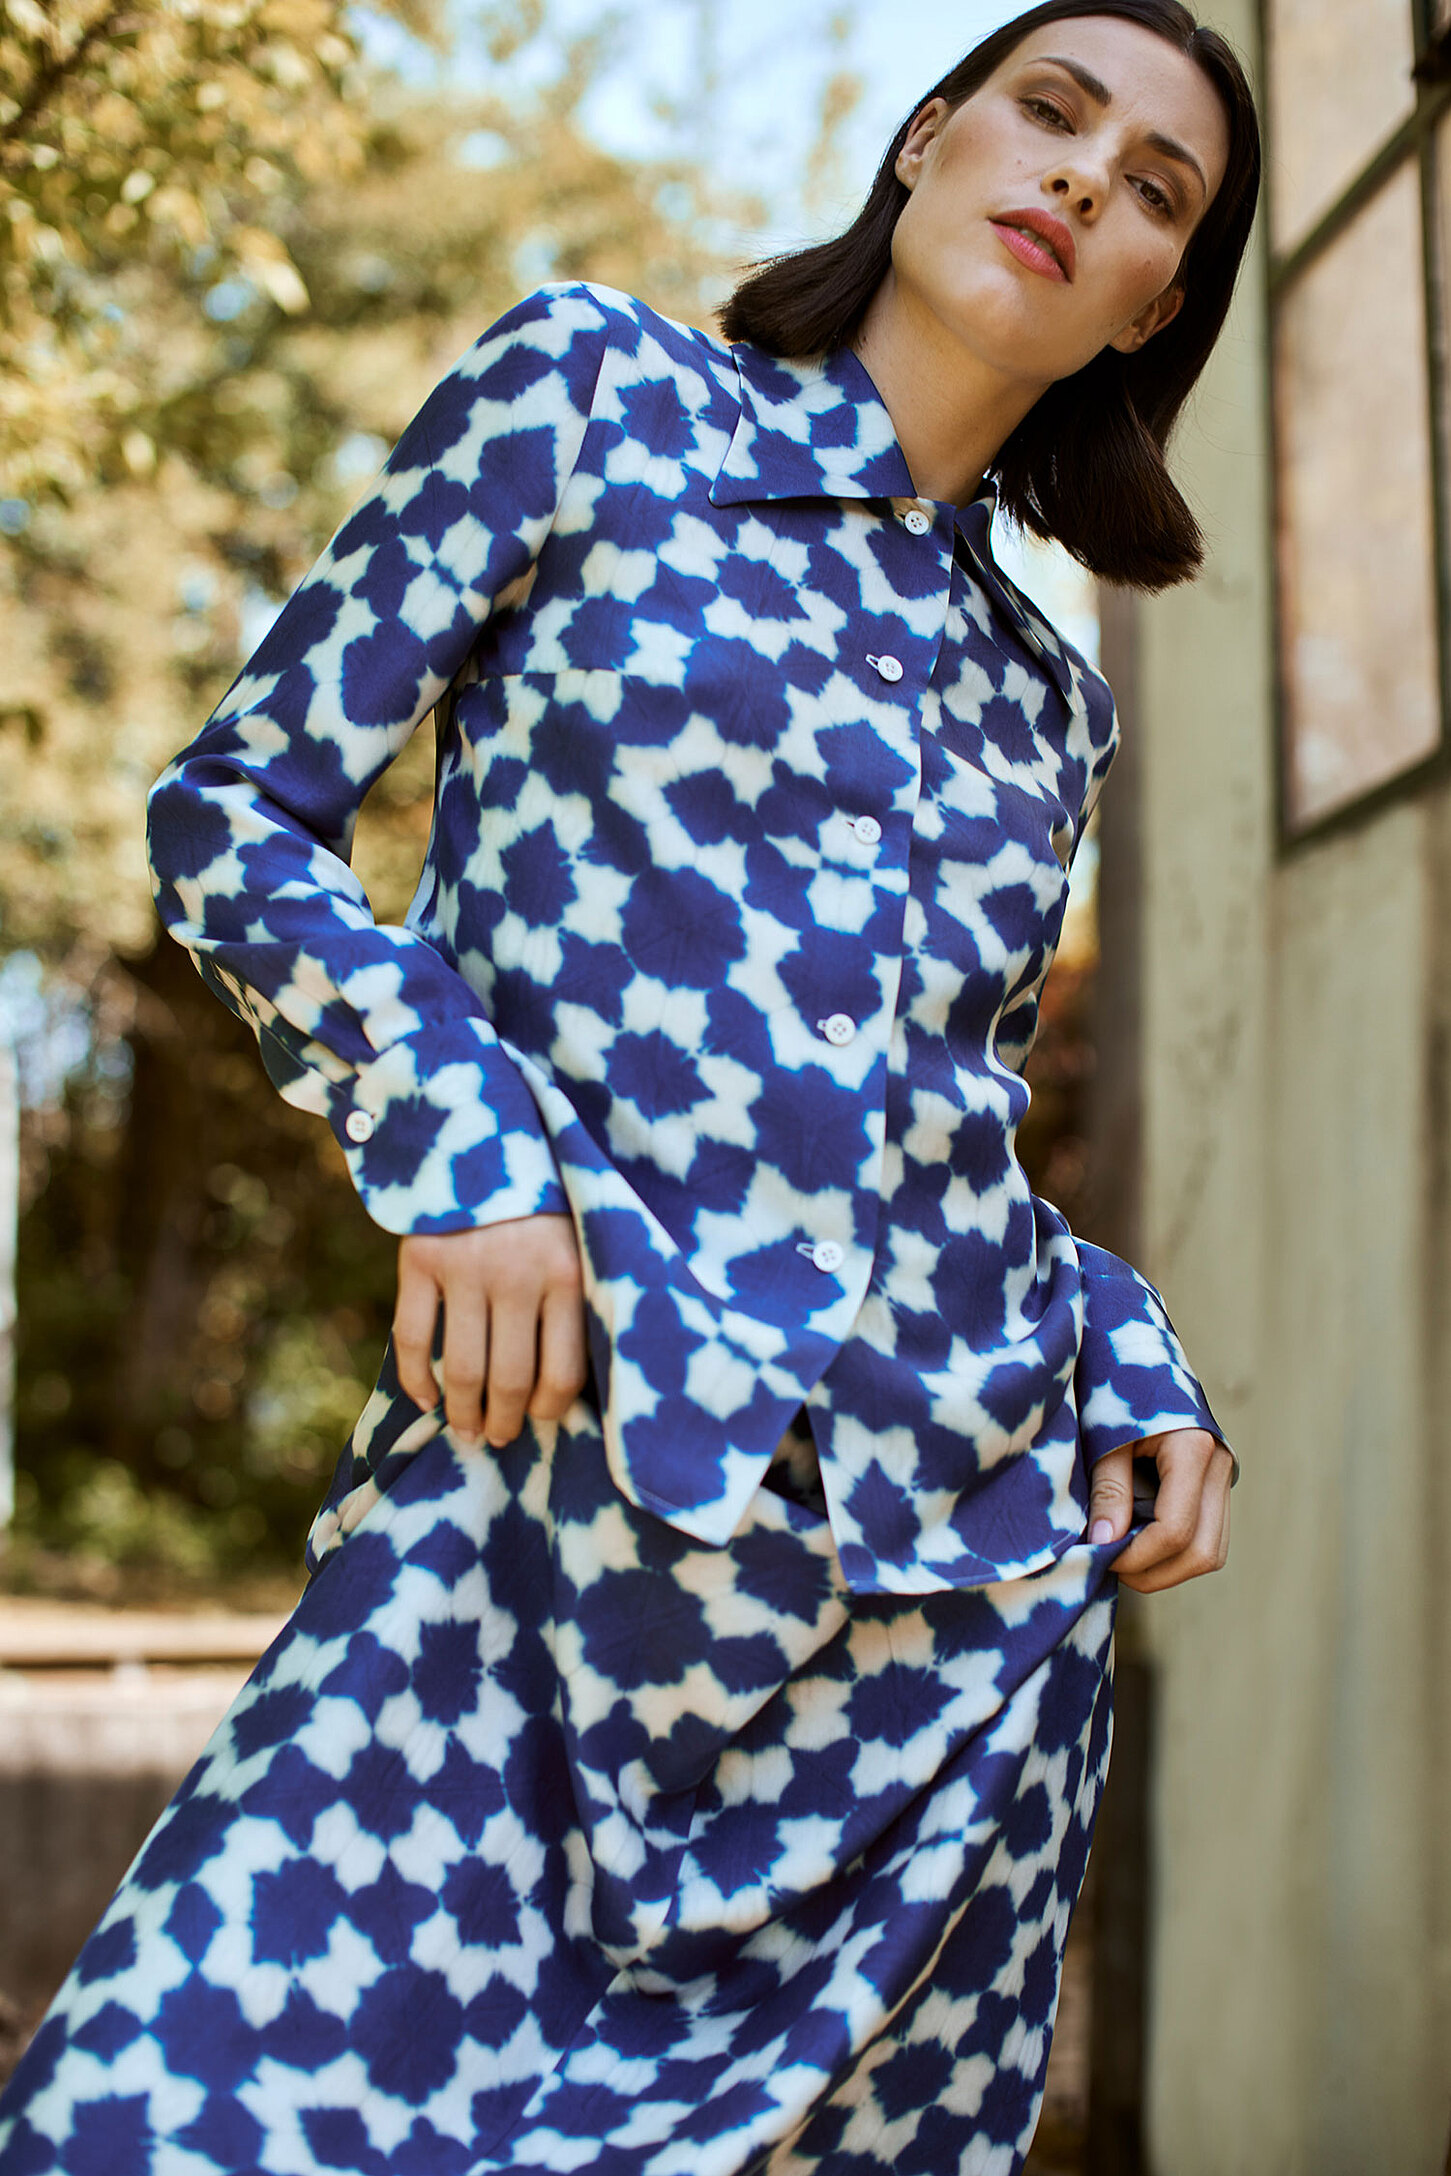 Stephanie pothen, fashion collection, designer collection,, fashion photography, modefotografin, blue outfit